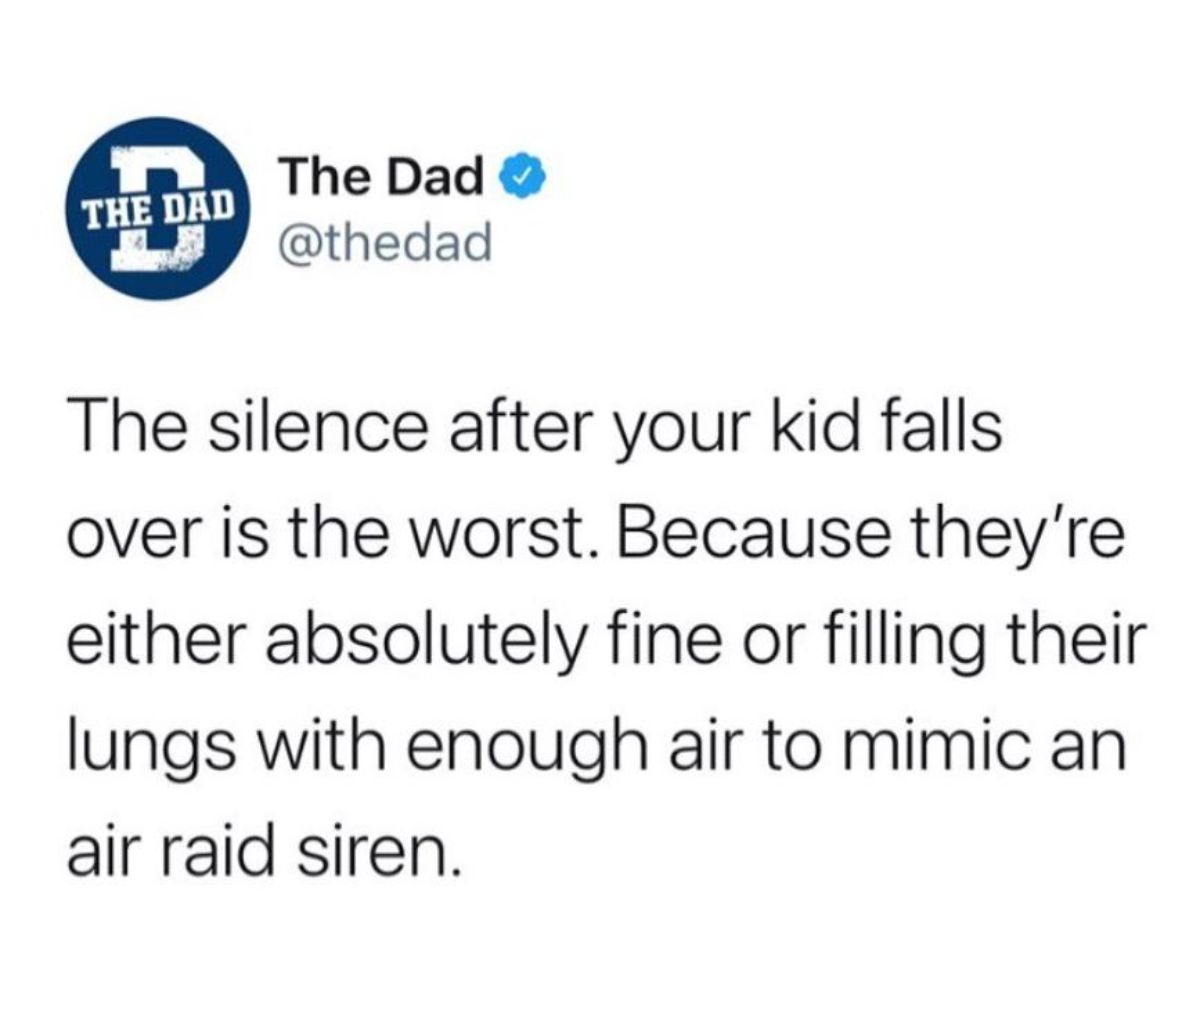 majorelle blue - The Dad The Dad The silence after your kid falls over is the worst. Because they're either absolutely fine or filling their lungs with enough air to mimic an air raid siren.